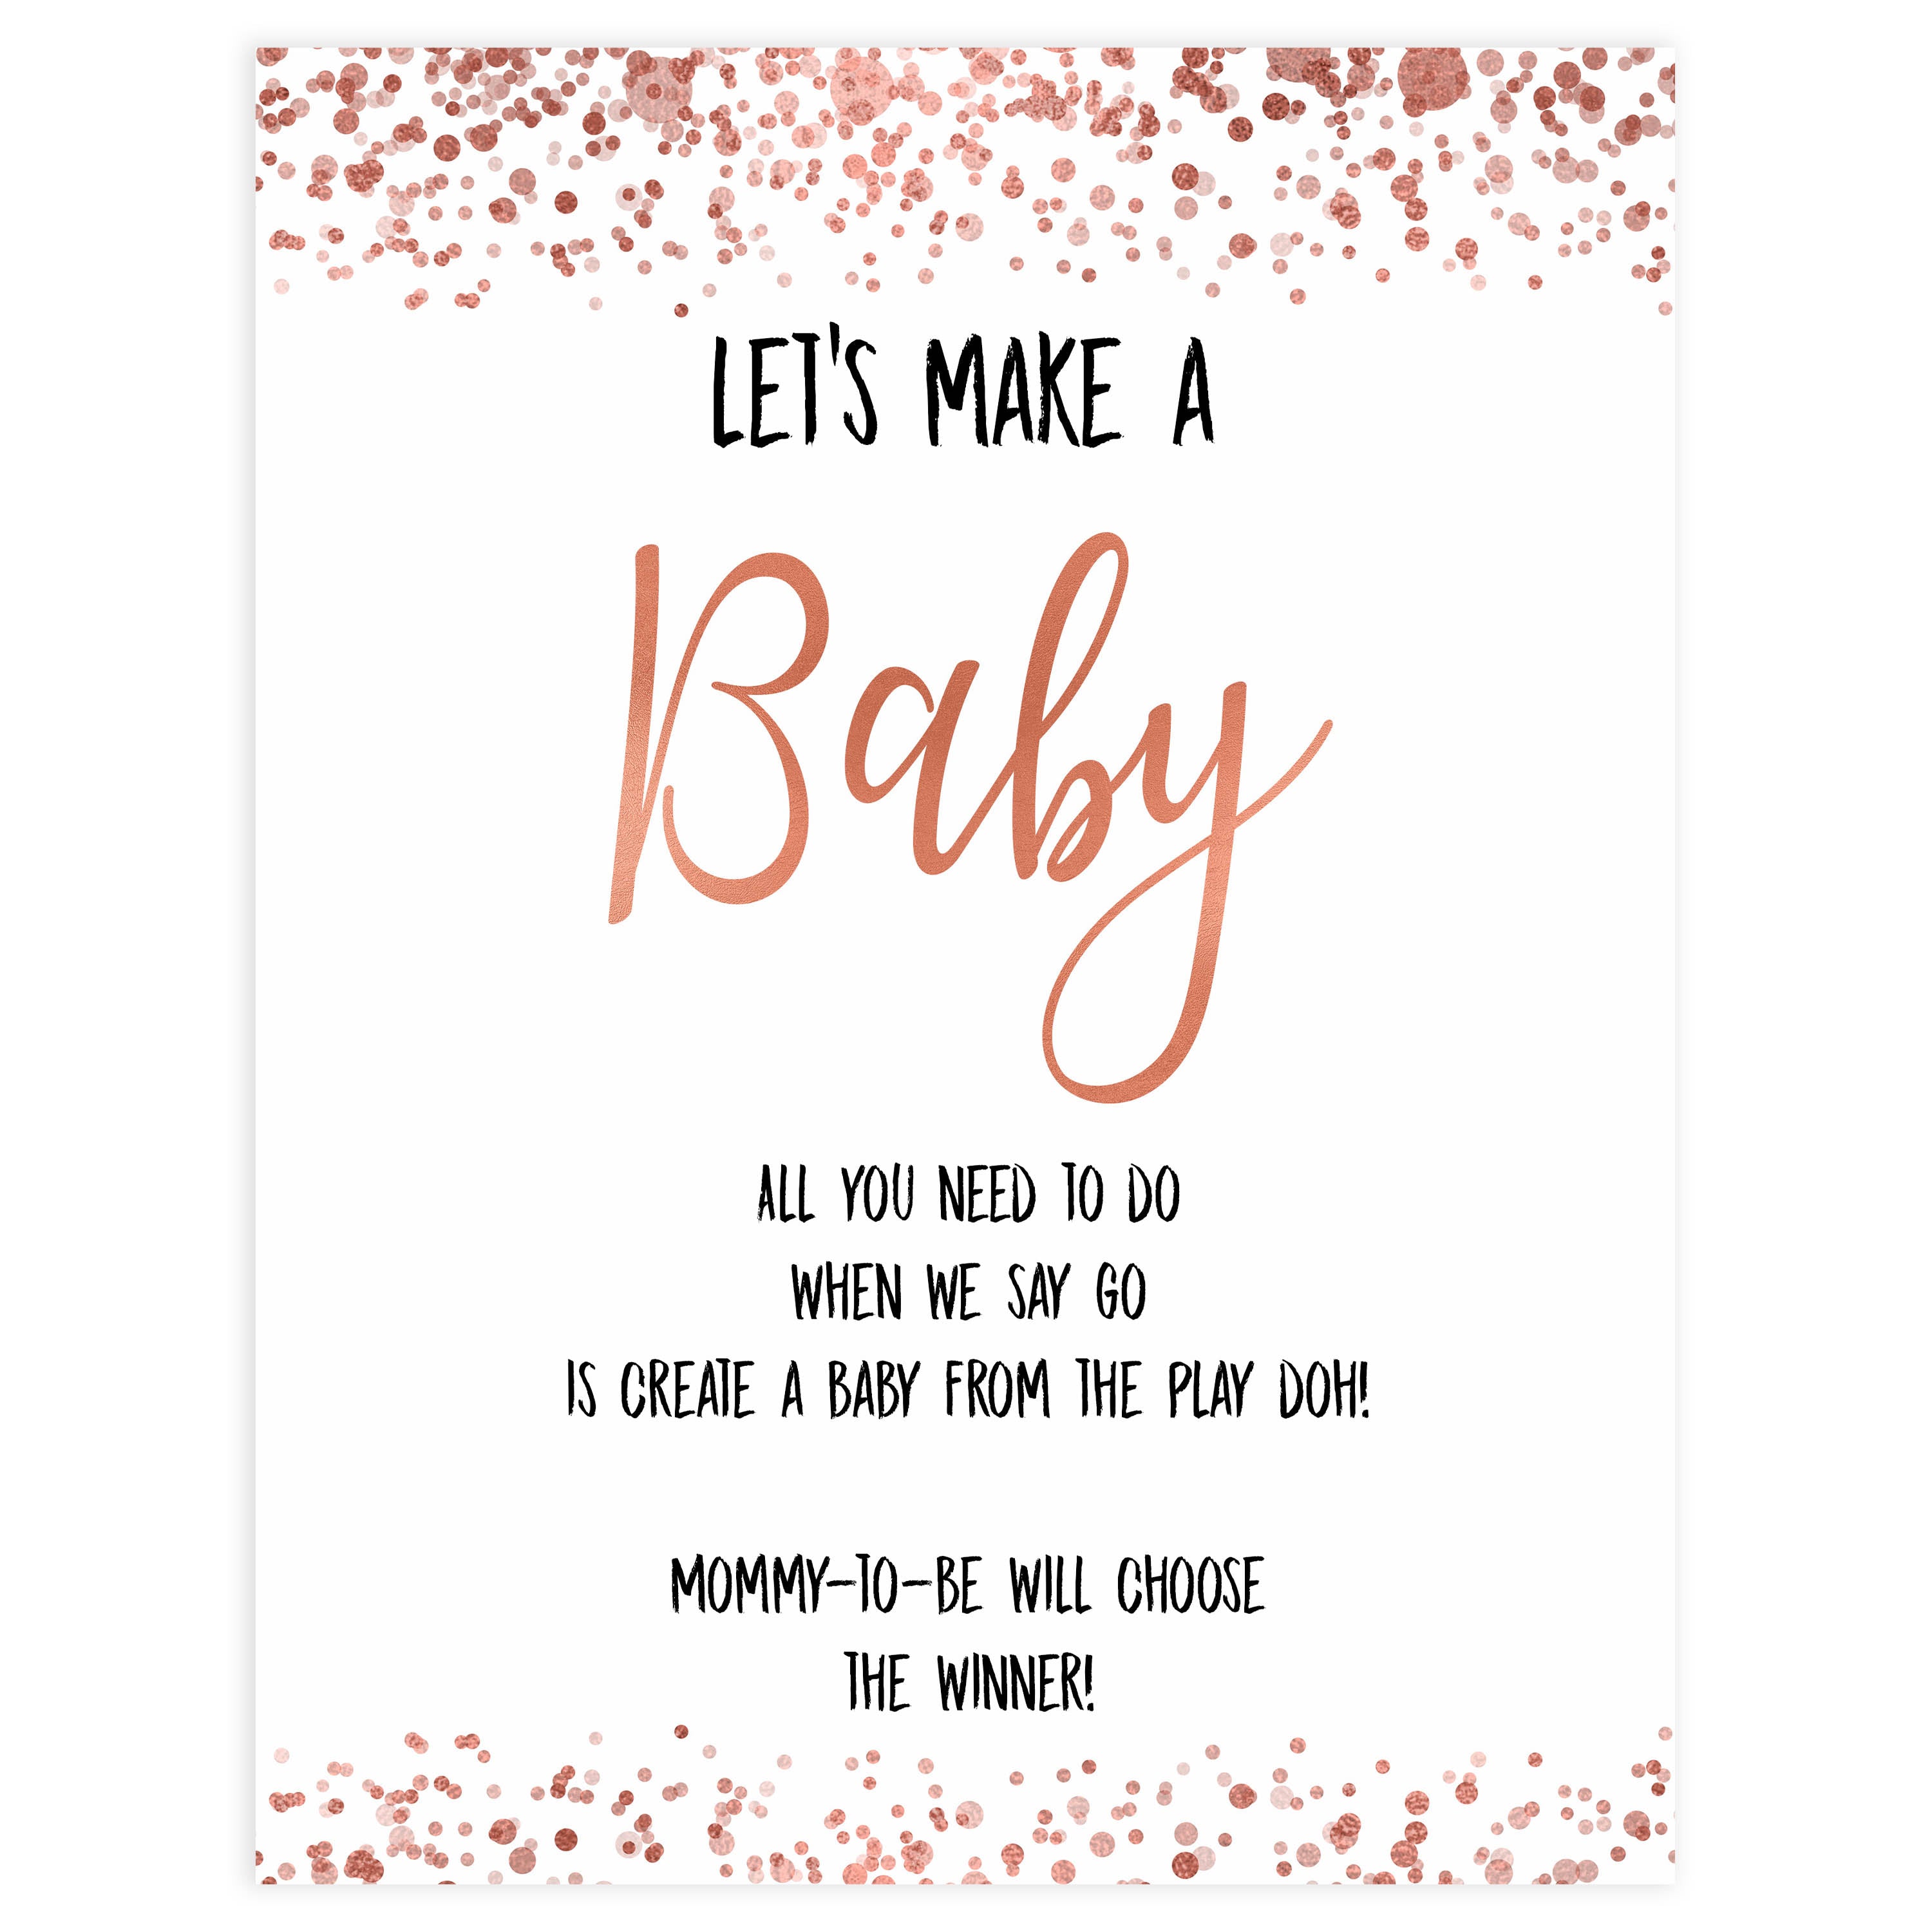 lets make a baby game, make a baby game, Printable baby shower games, rose gold fun baby games, baby shower games, fun baby shower ideas, top baby shower ideas, blush baby shower, rose gold baby shower ideas